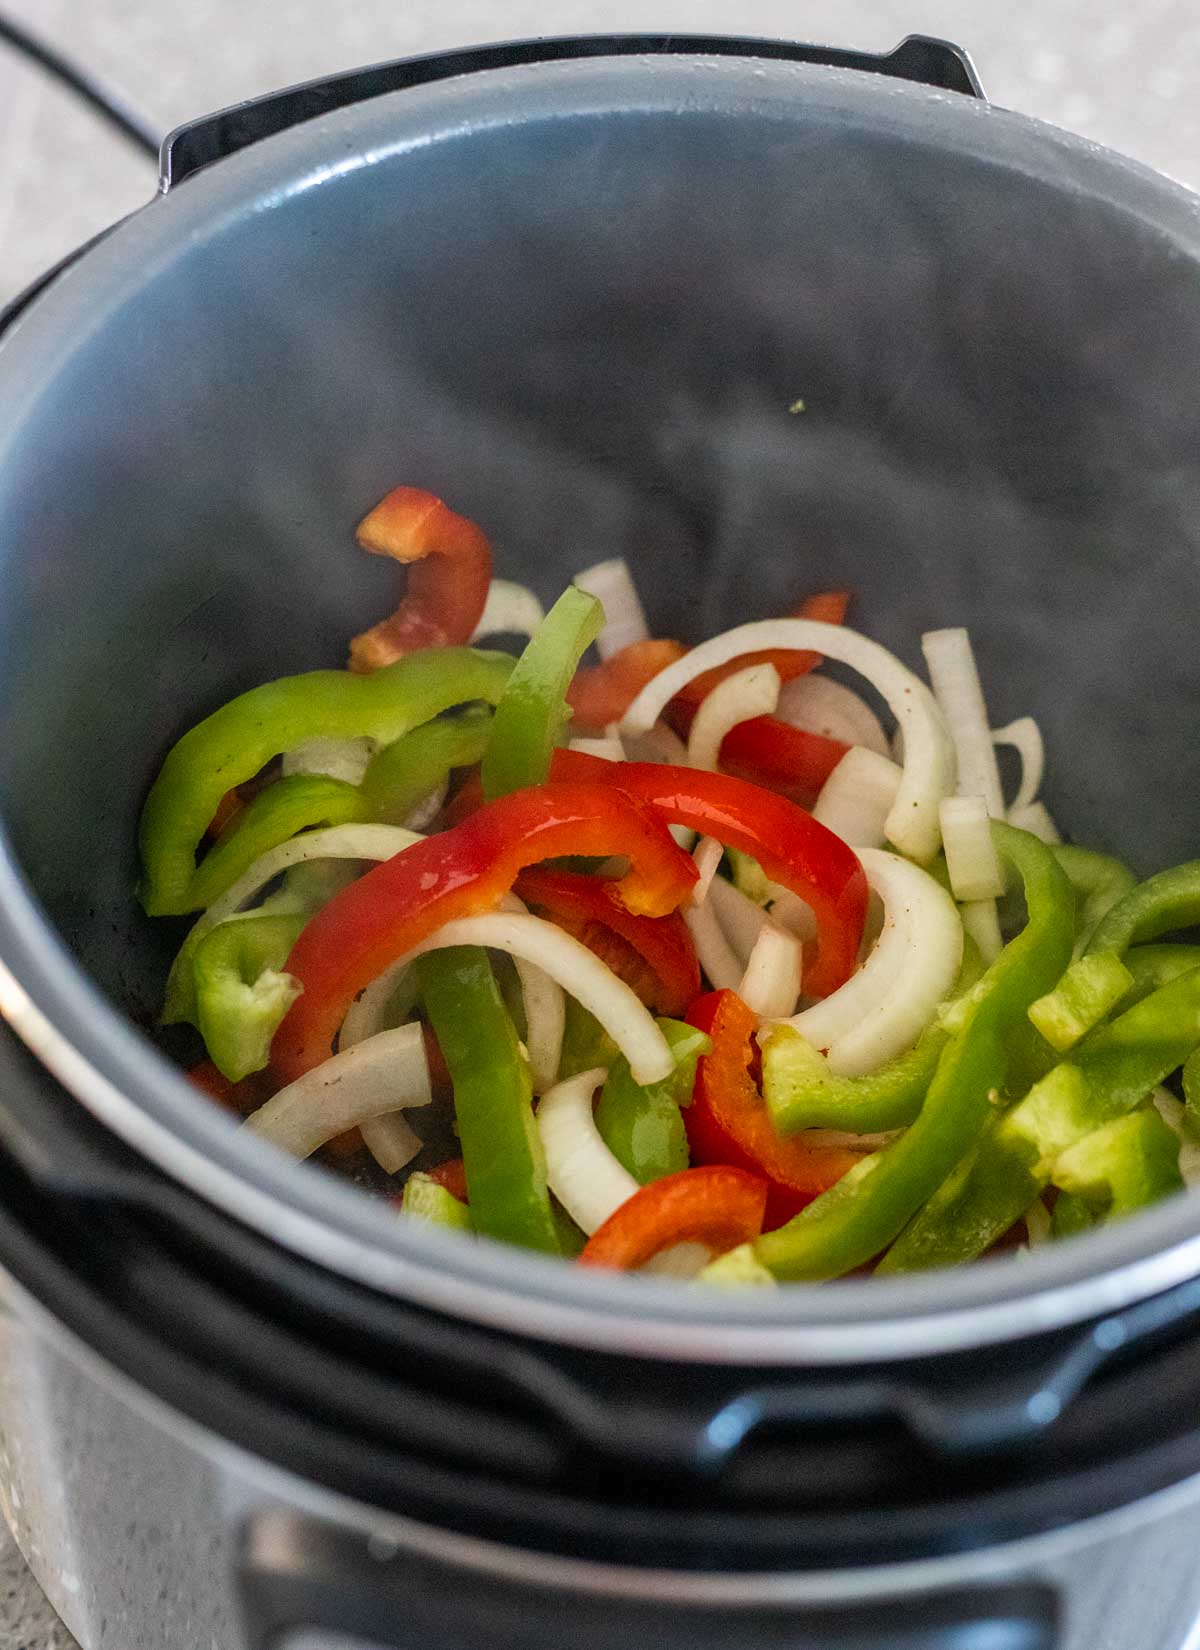 Sliced peppers and onions being sautéed in the Instant Pot insert.